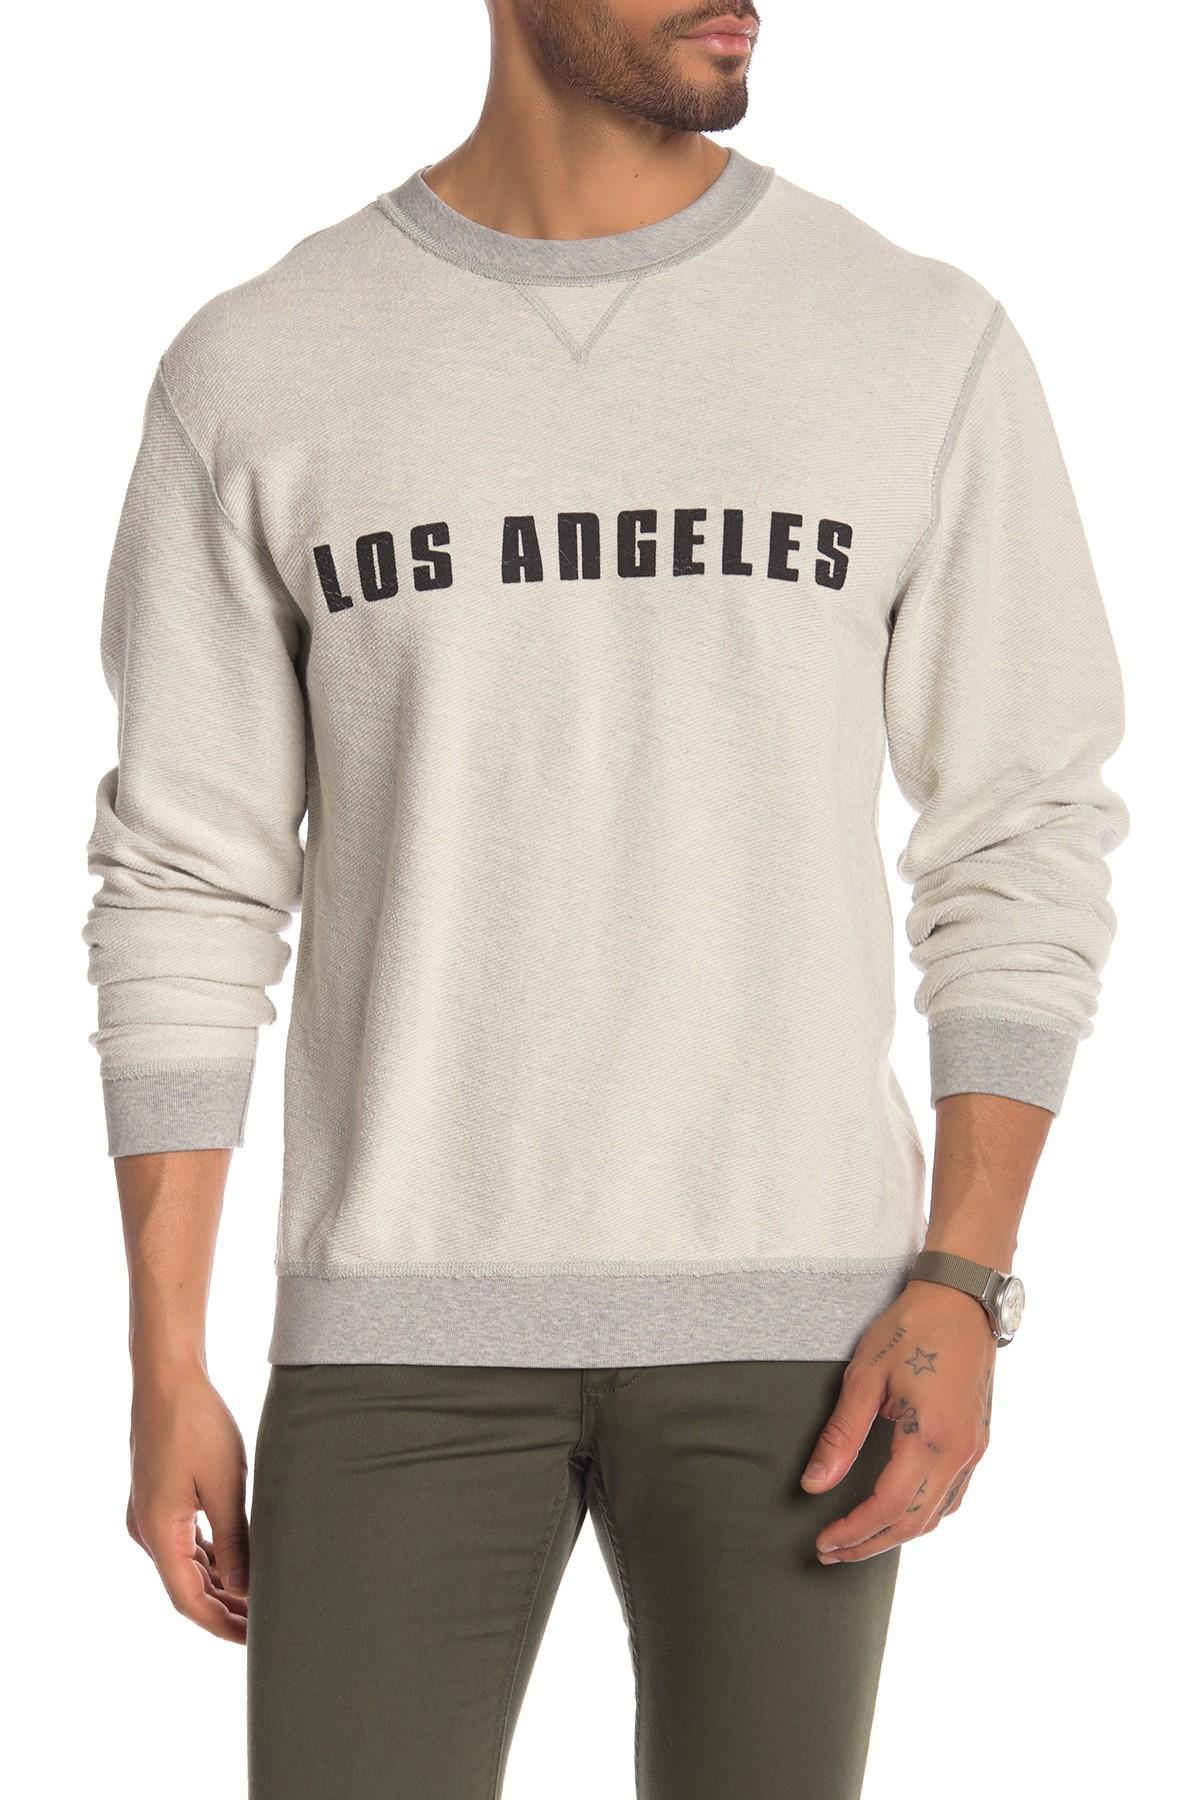 Lyst - 7 For All Mankind Reversible Crew Neck Sweatshirt in Gray for Men